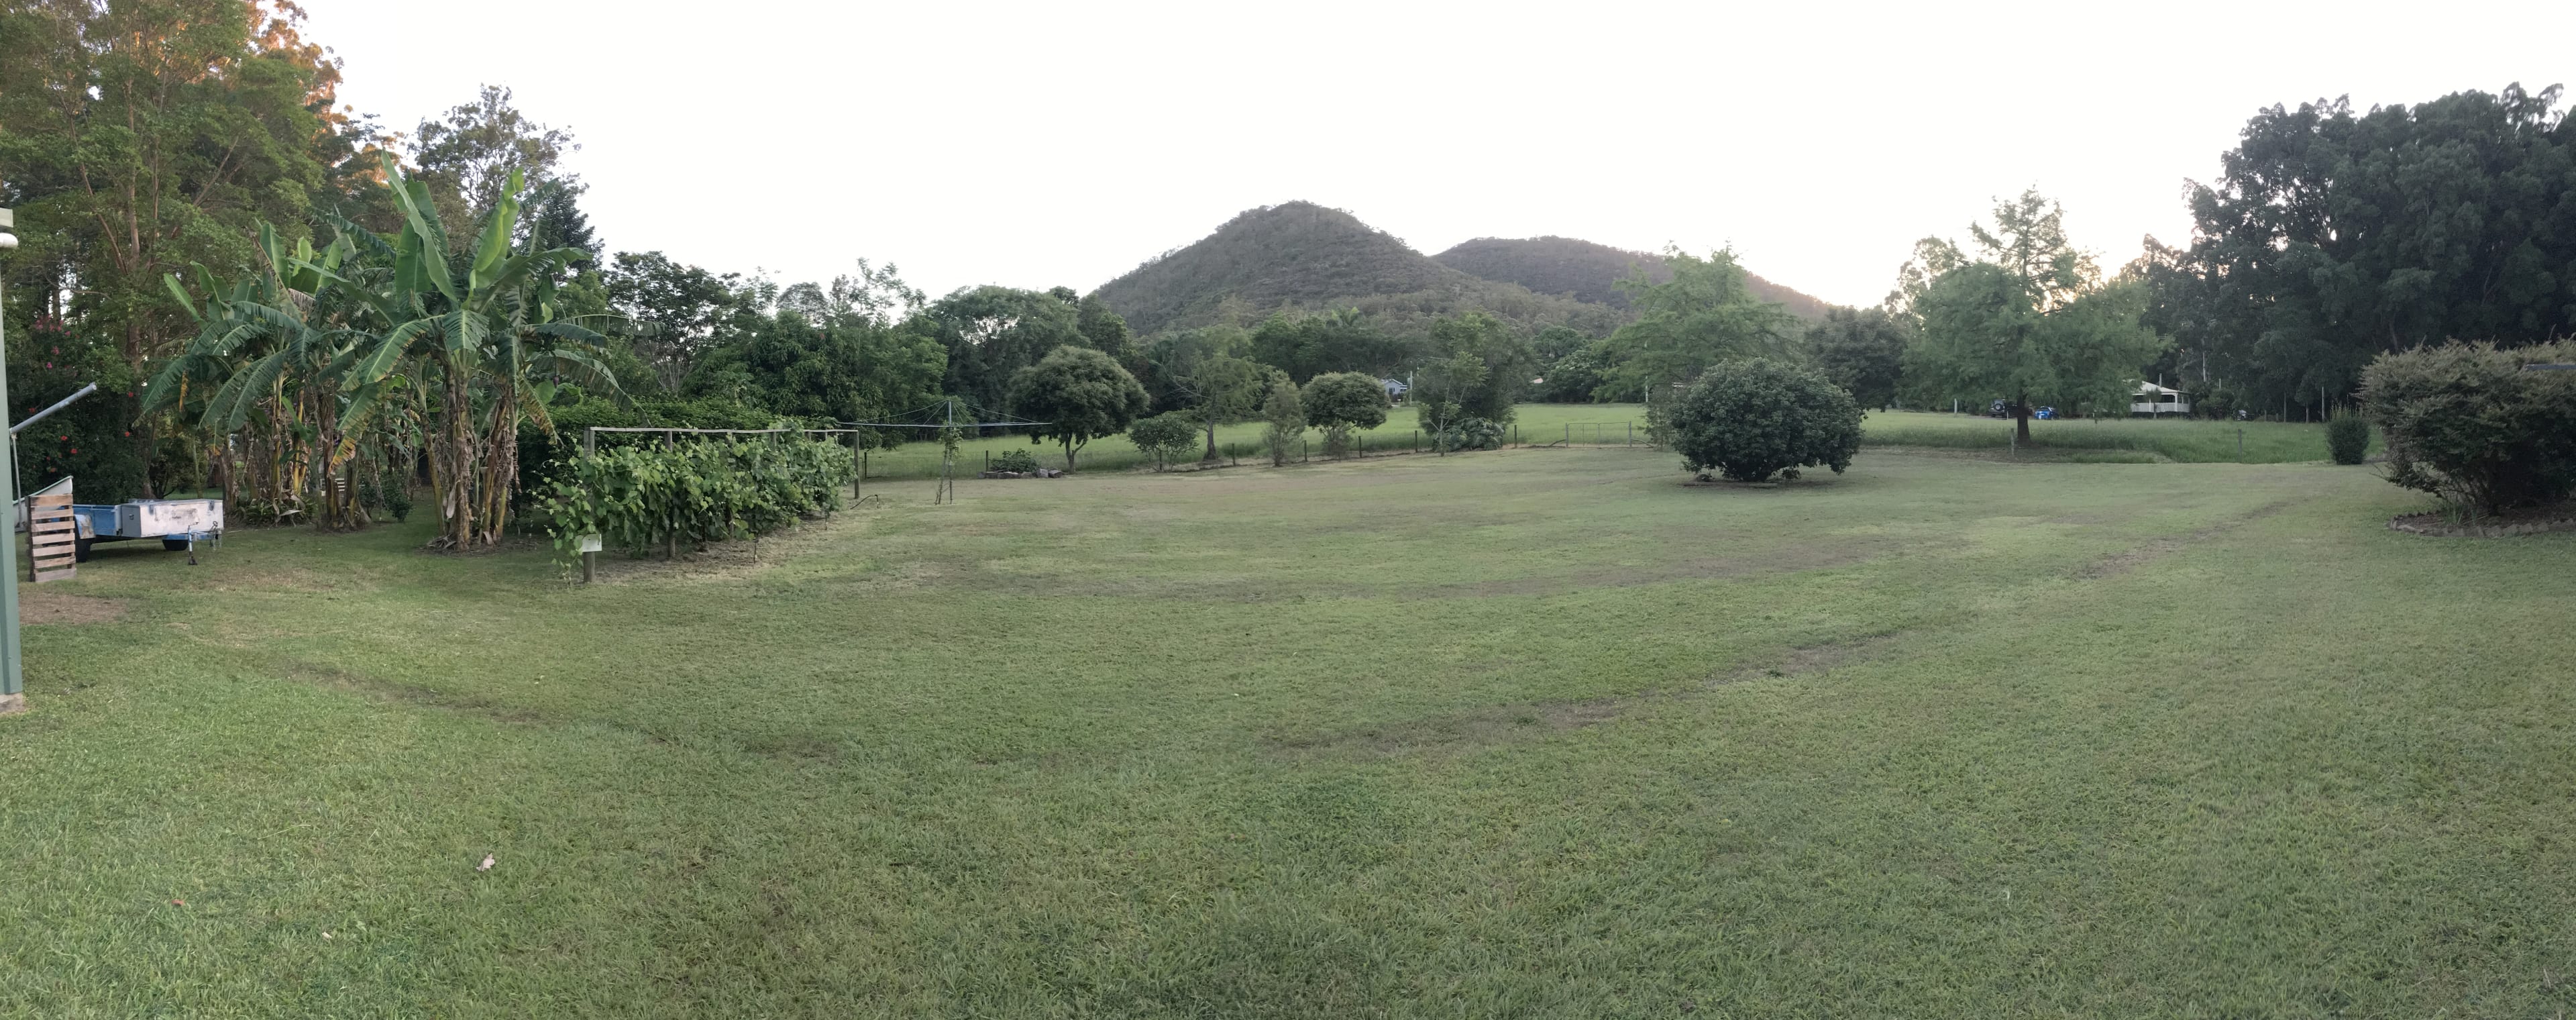 Panorama (2) of Orchard and Camp Area